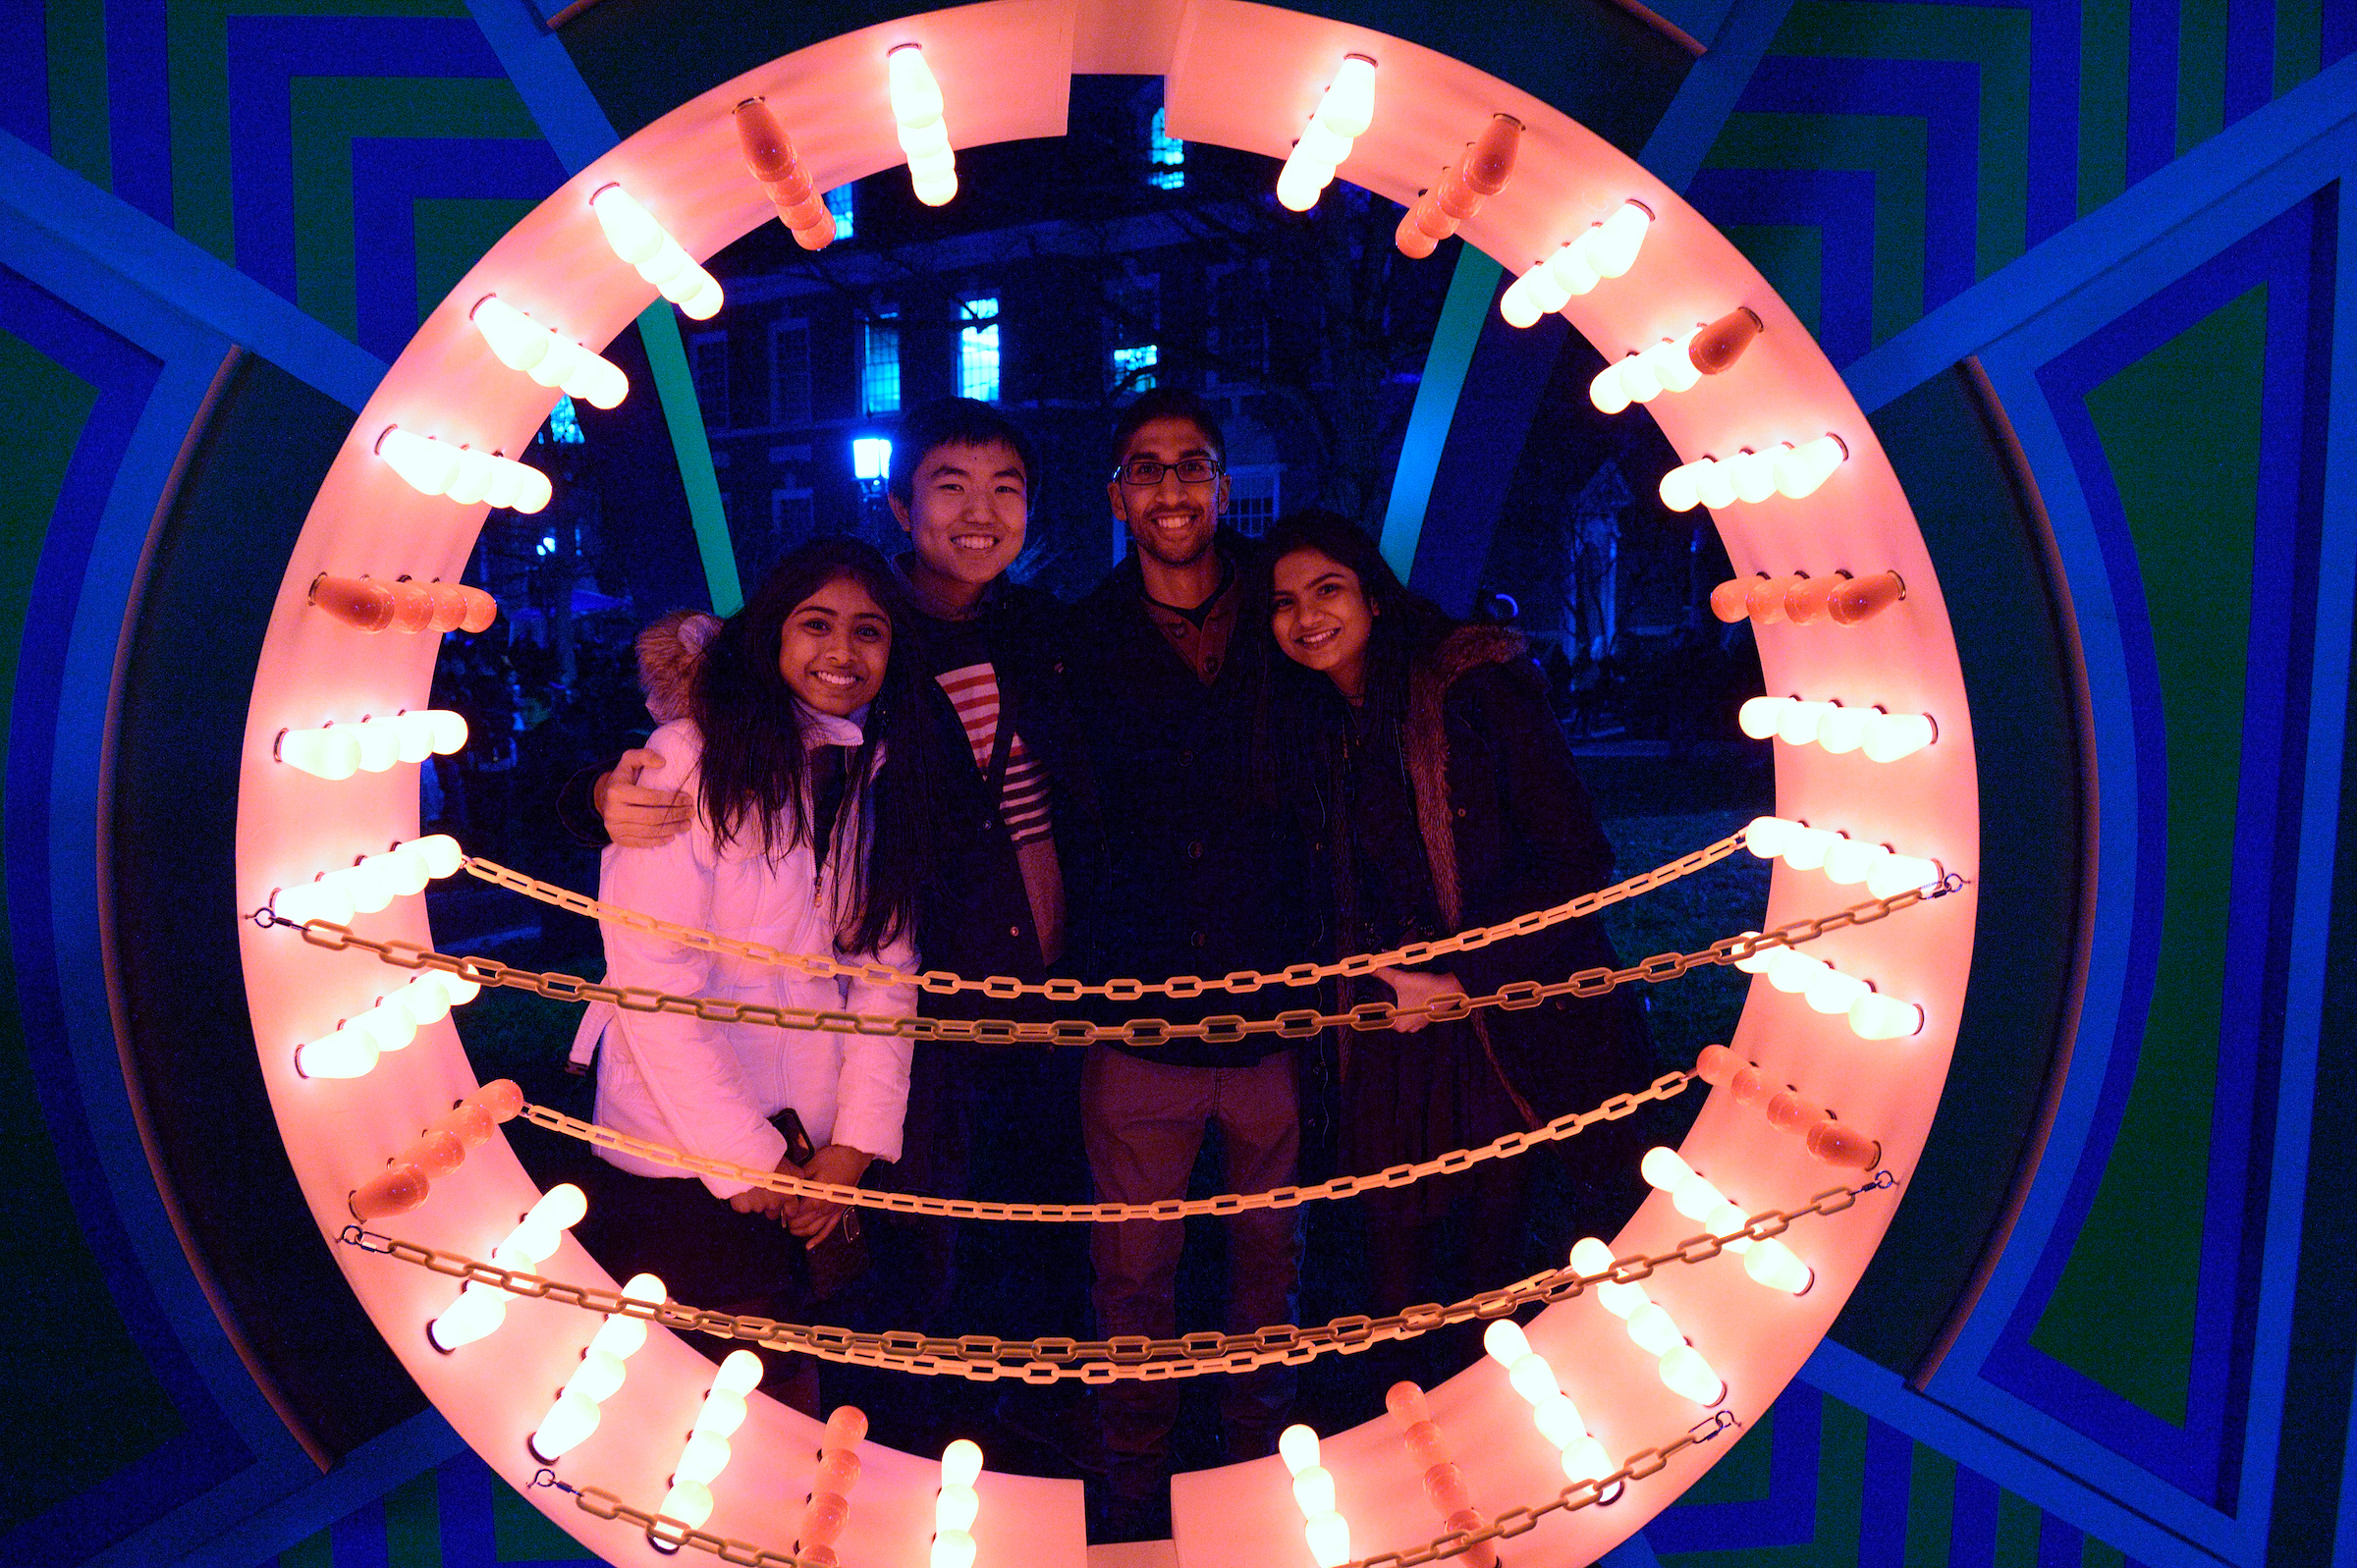 Four students posing for a photo, illuminated by a lighted sculpture by Scott Pennington.